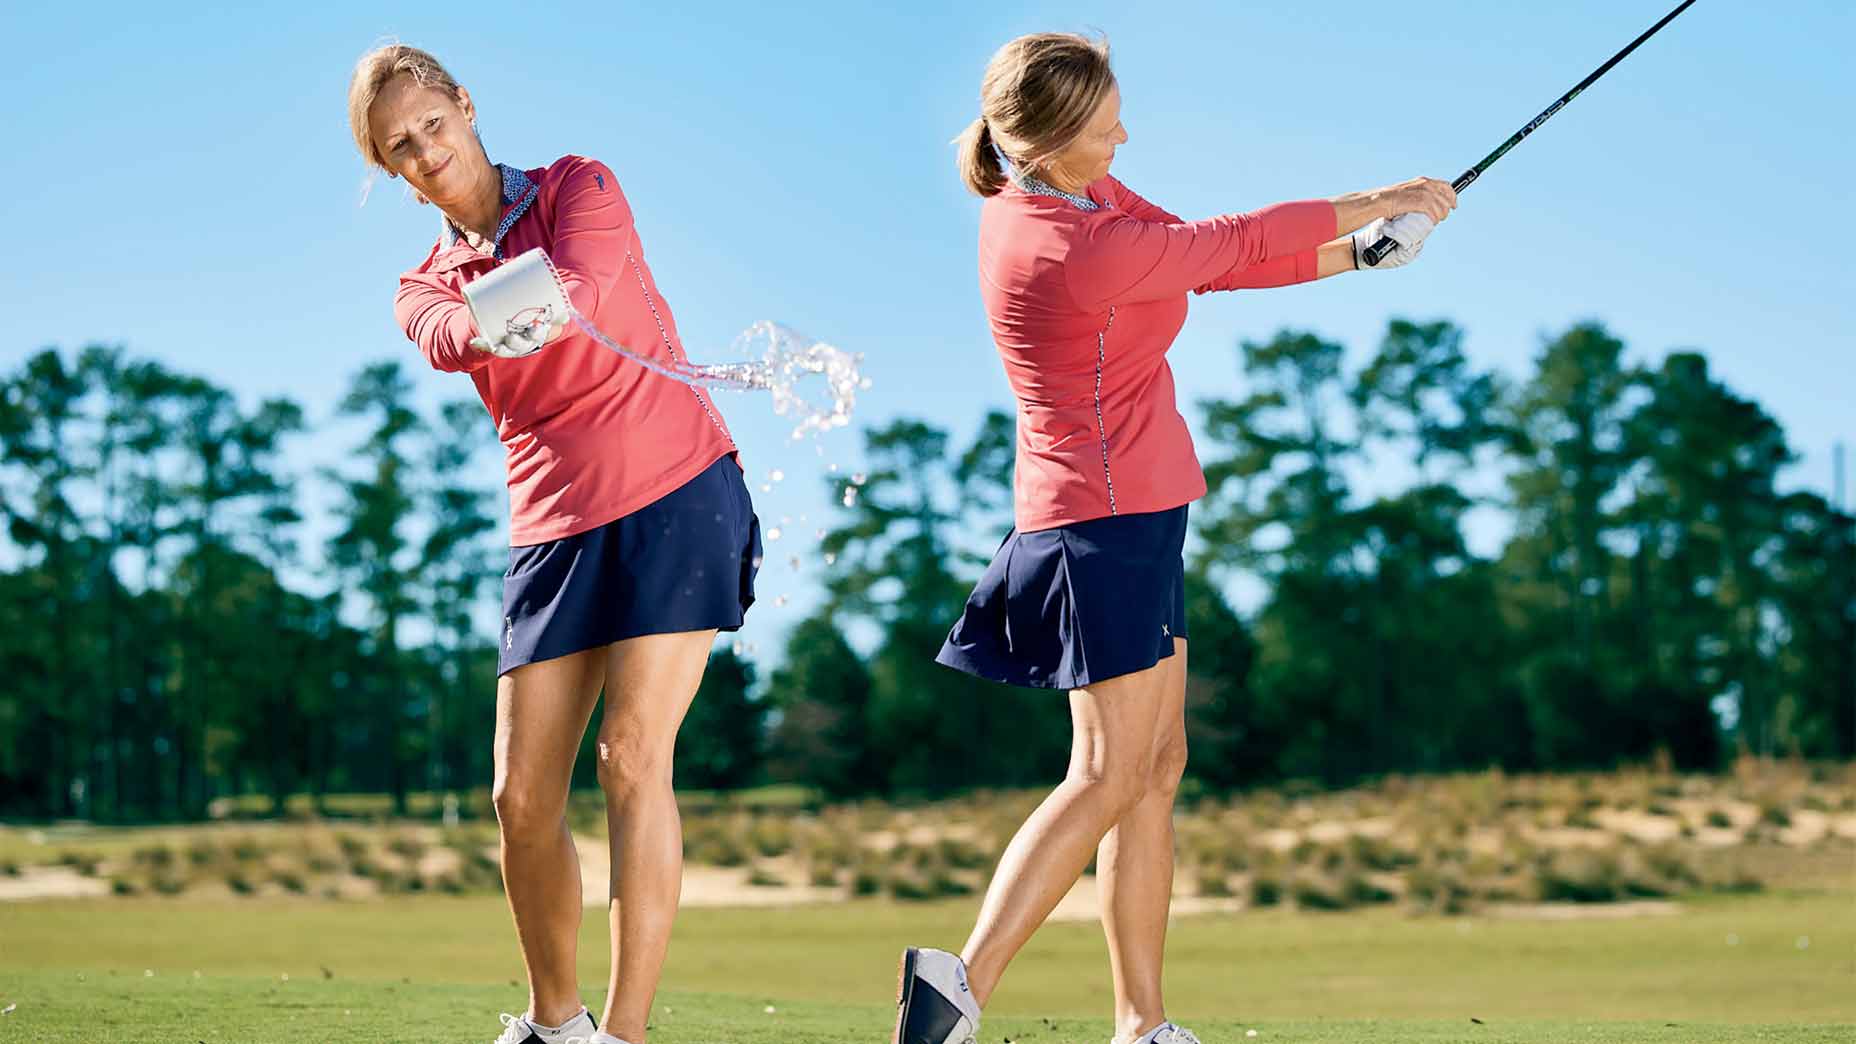 Use this simple swing thought to get more power out of your golf swing